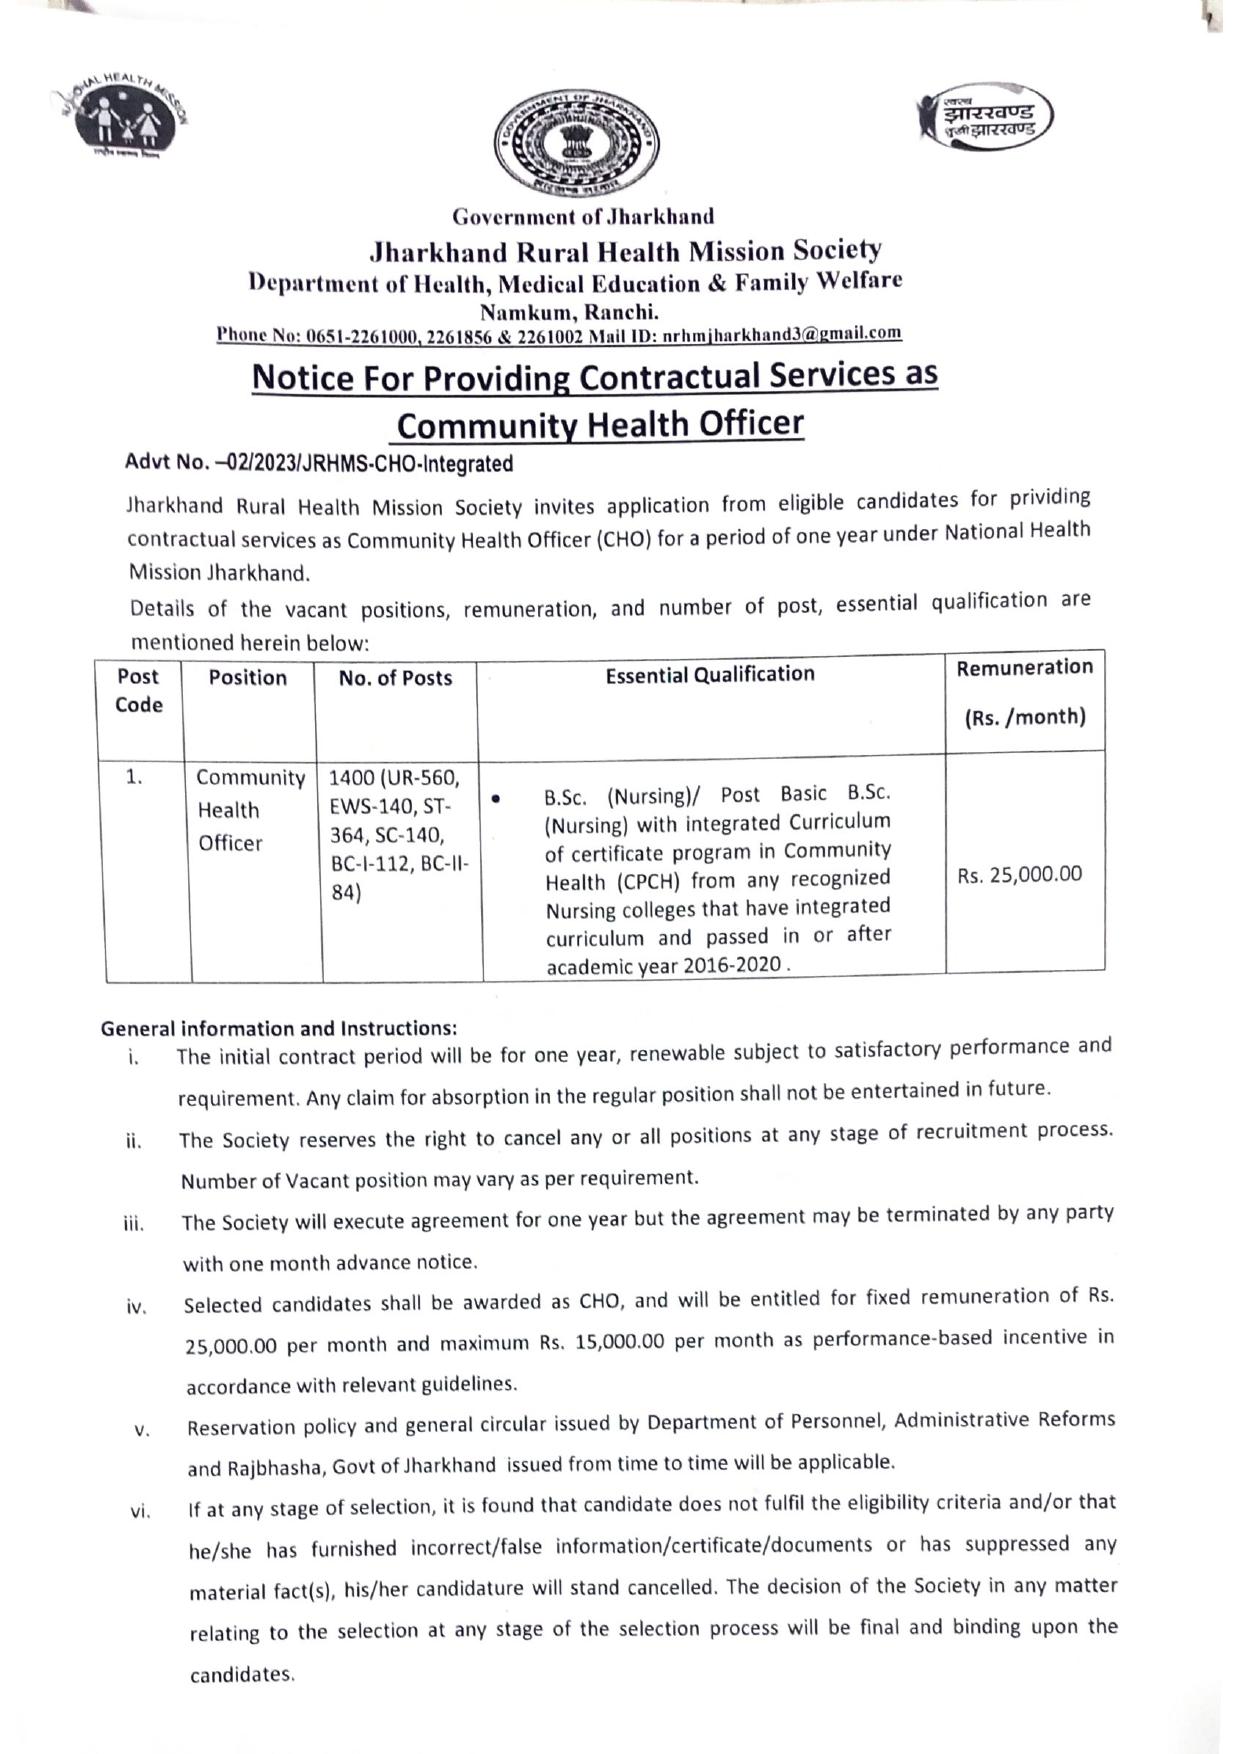 JRHMS Community Health Officer (CHO) Recruitment 2023 - Page 2